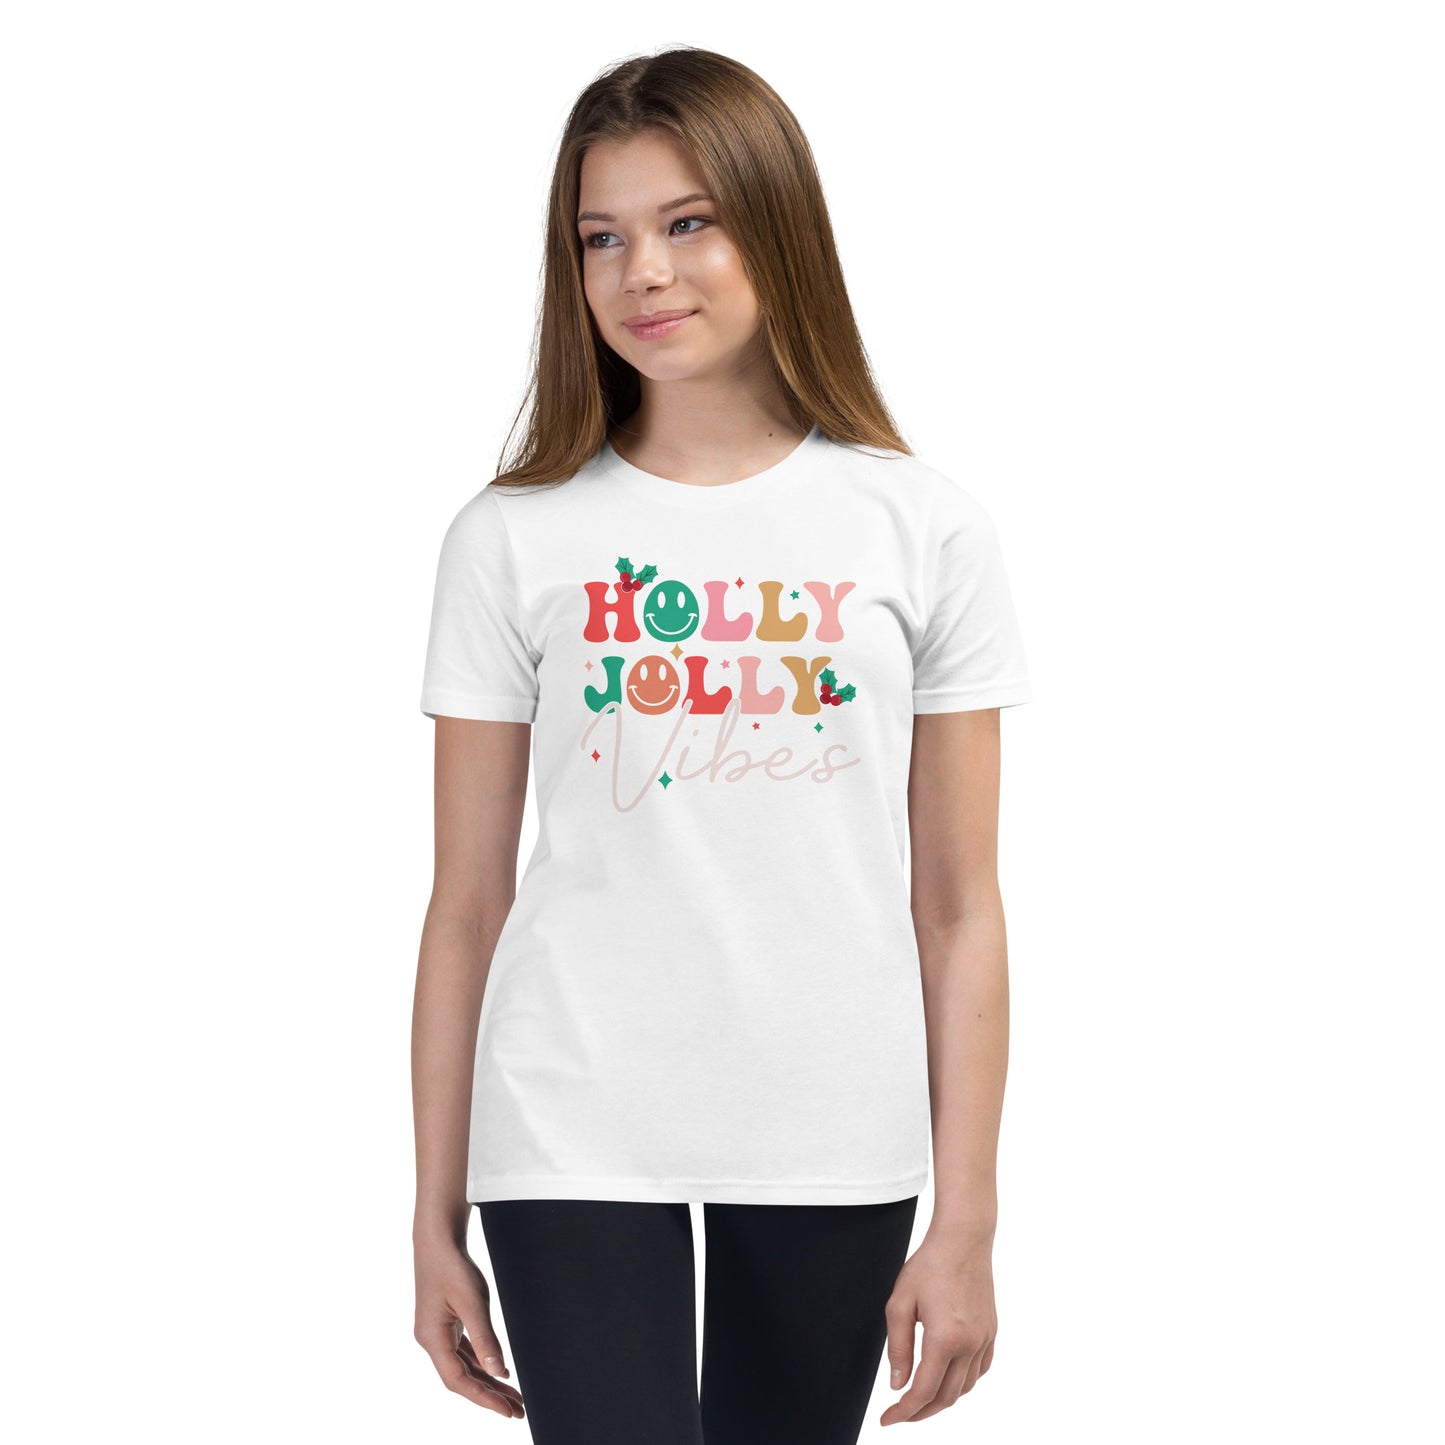 "Holly Jolly Vibes" Youth T-Shirt